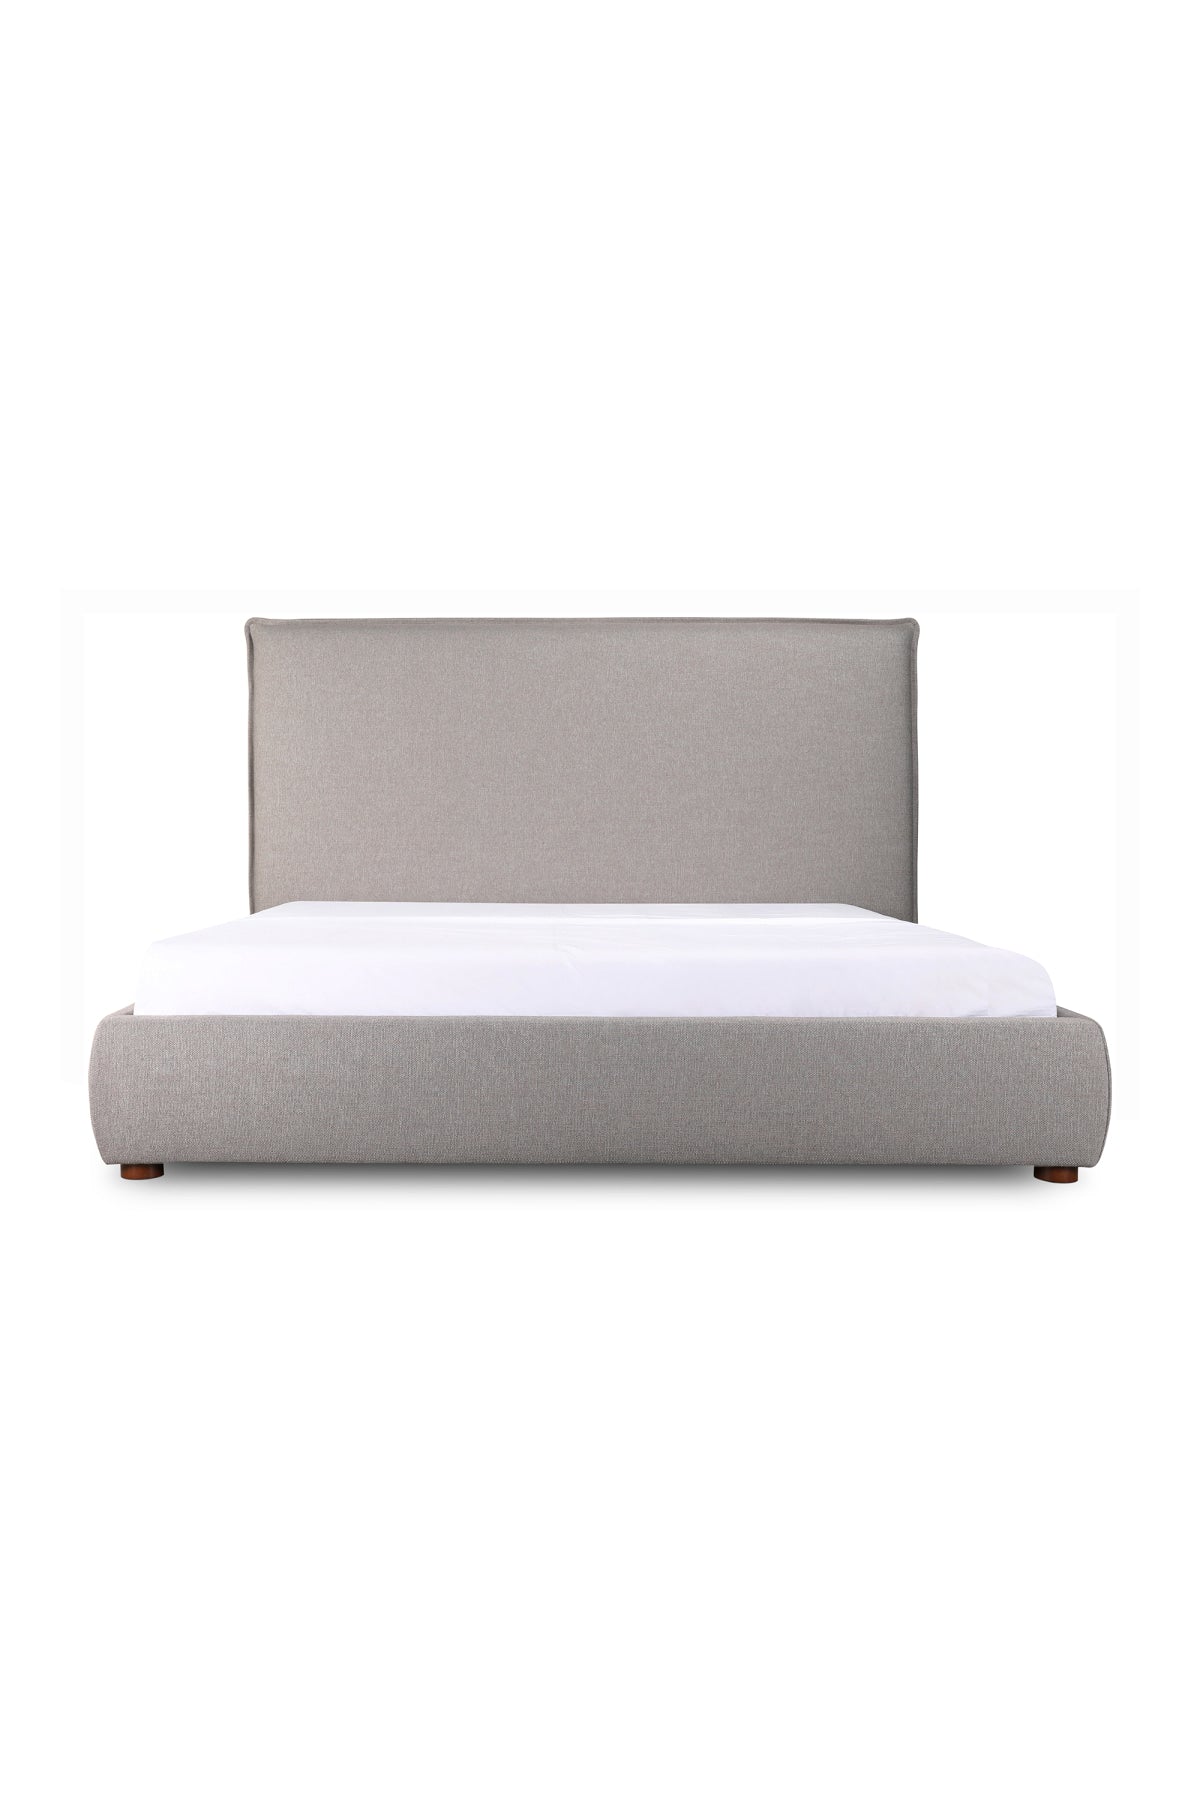 Library Upholstered Bed - Greystone